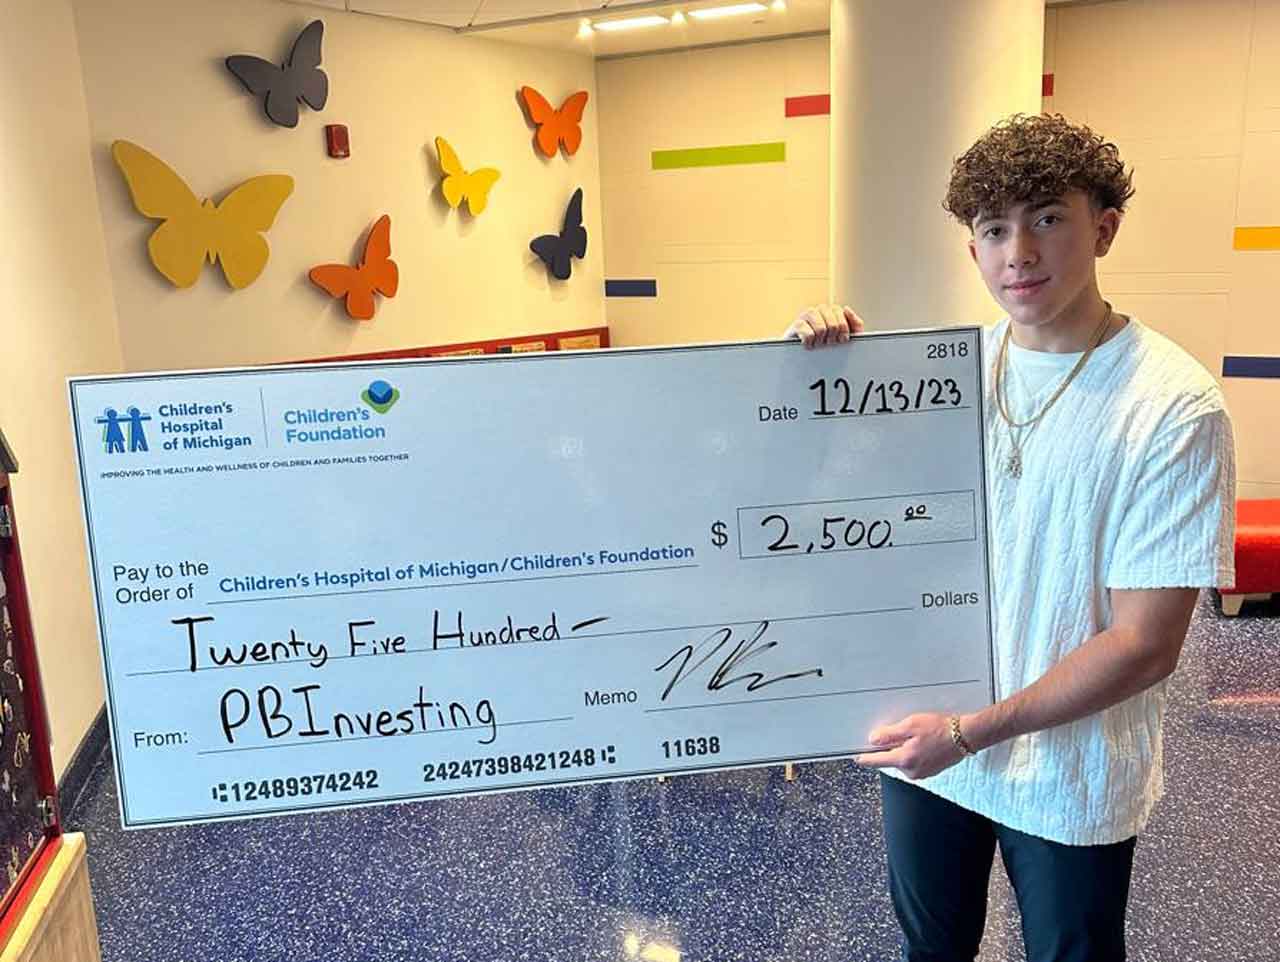 16-year-old PB Investing has captured the attention of many with his success in stock options trading and entrepreneurship